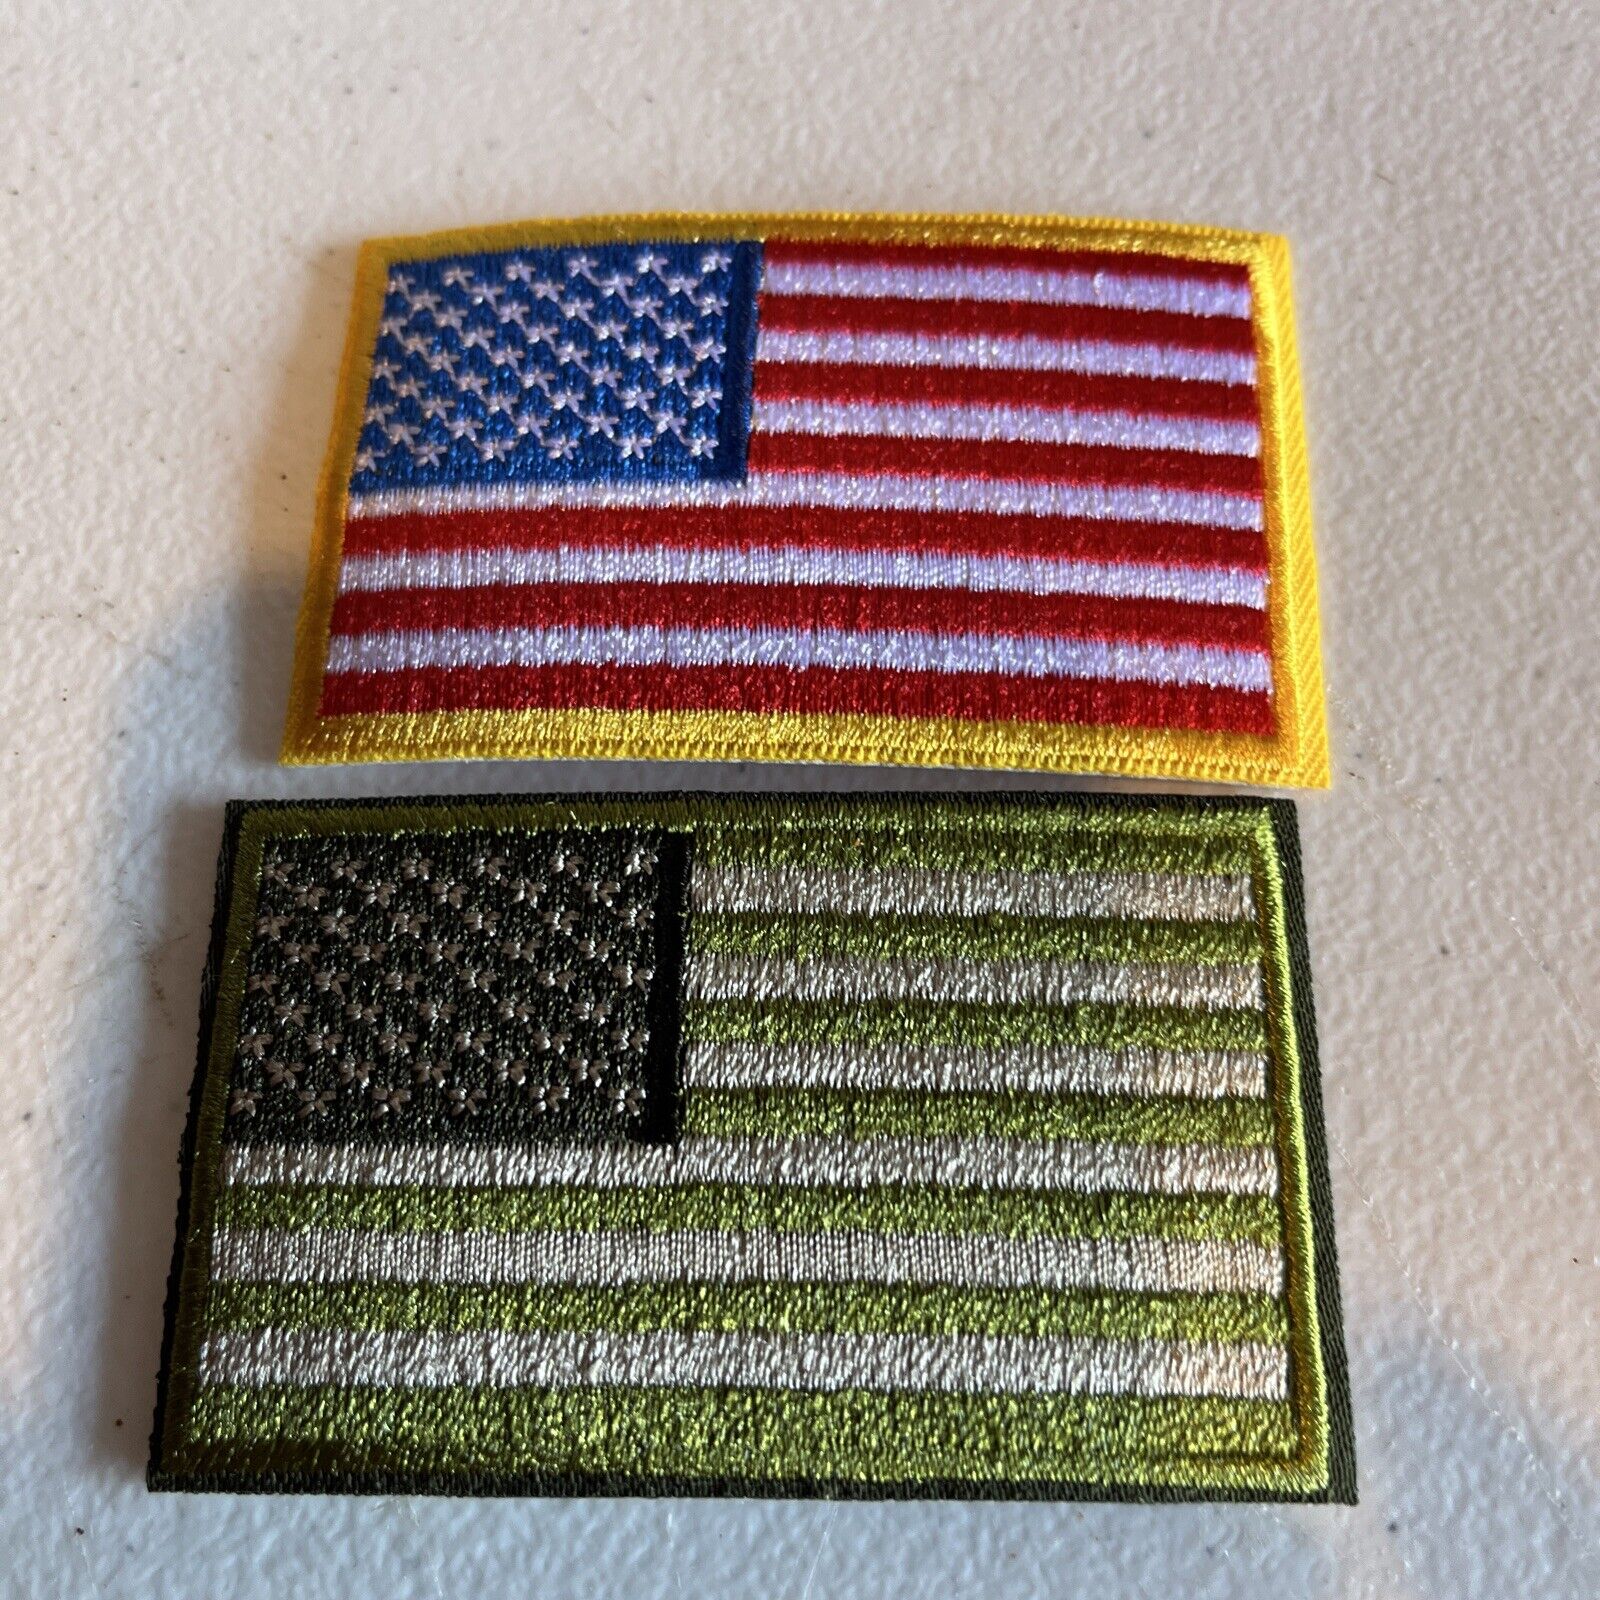 new Bastion Tactical Morale Patch and American military patch